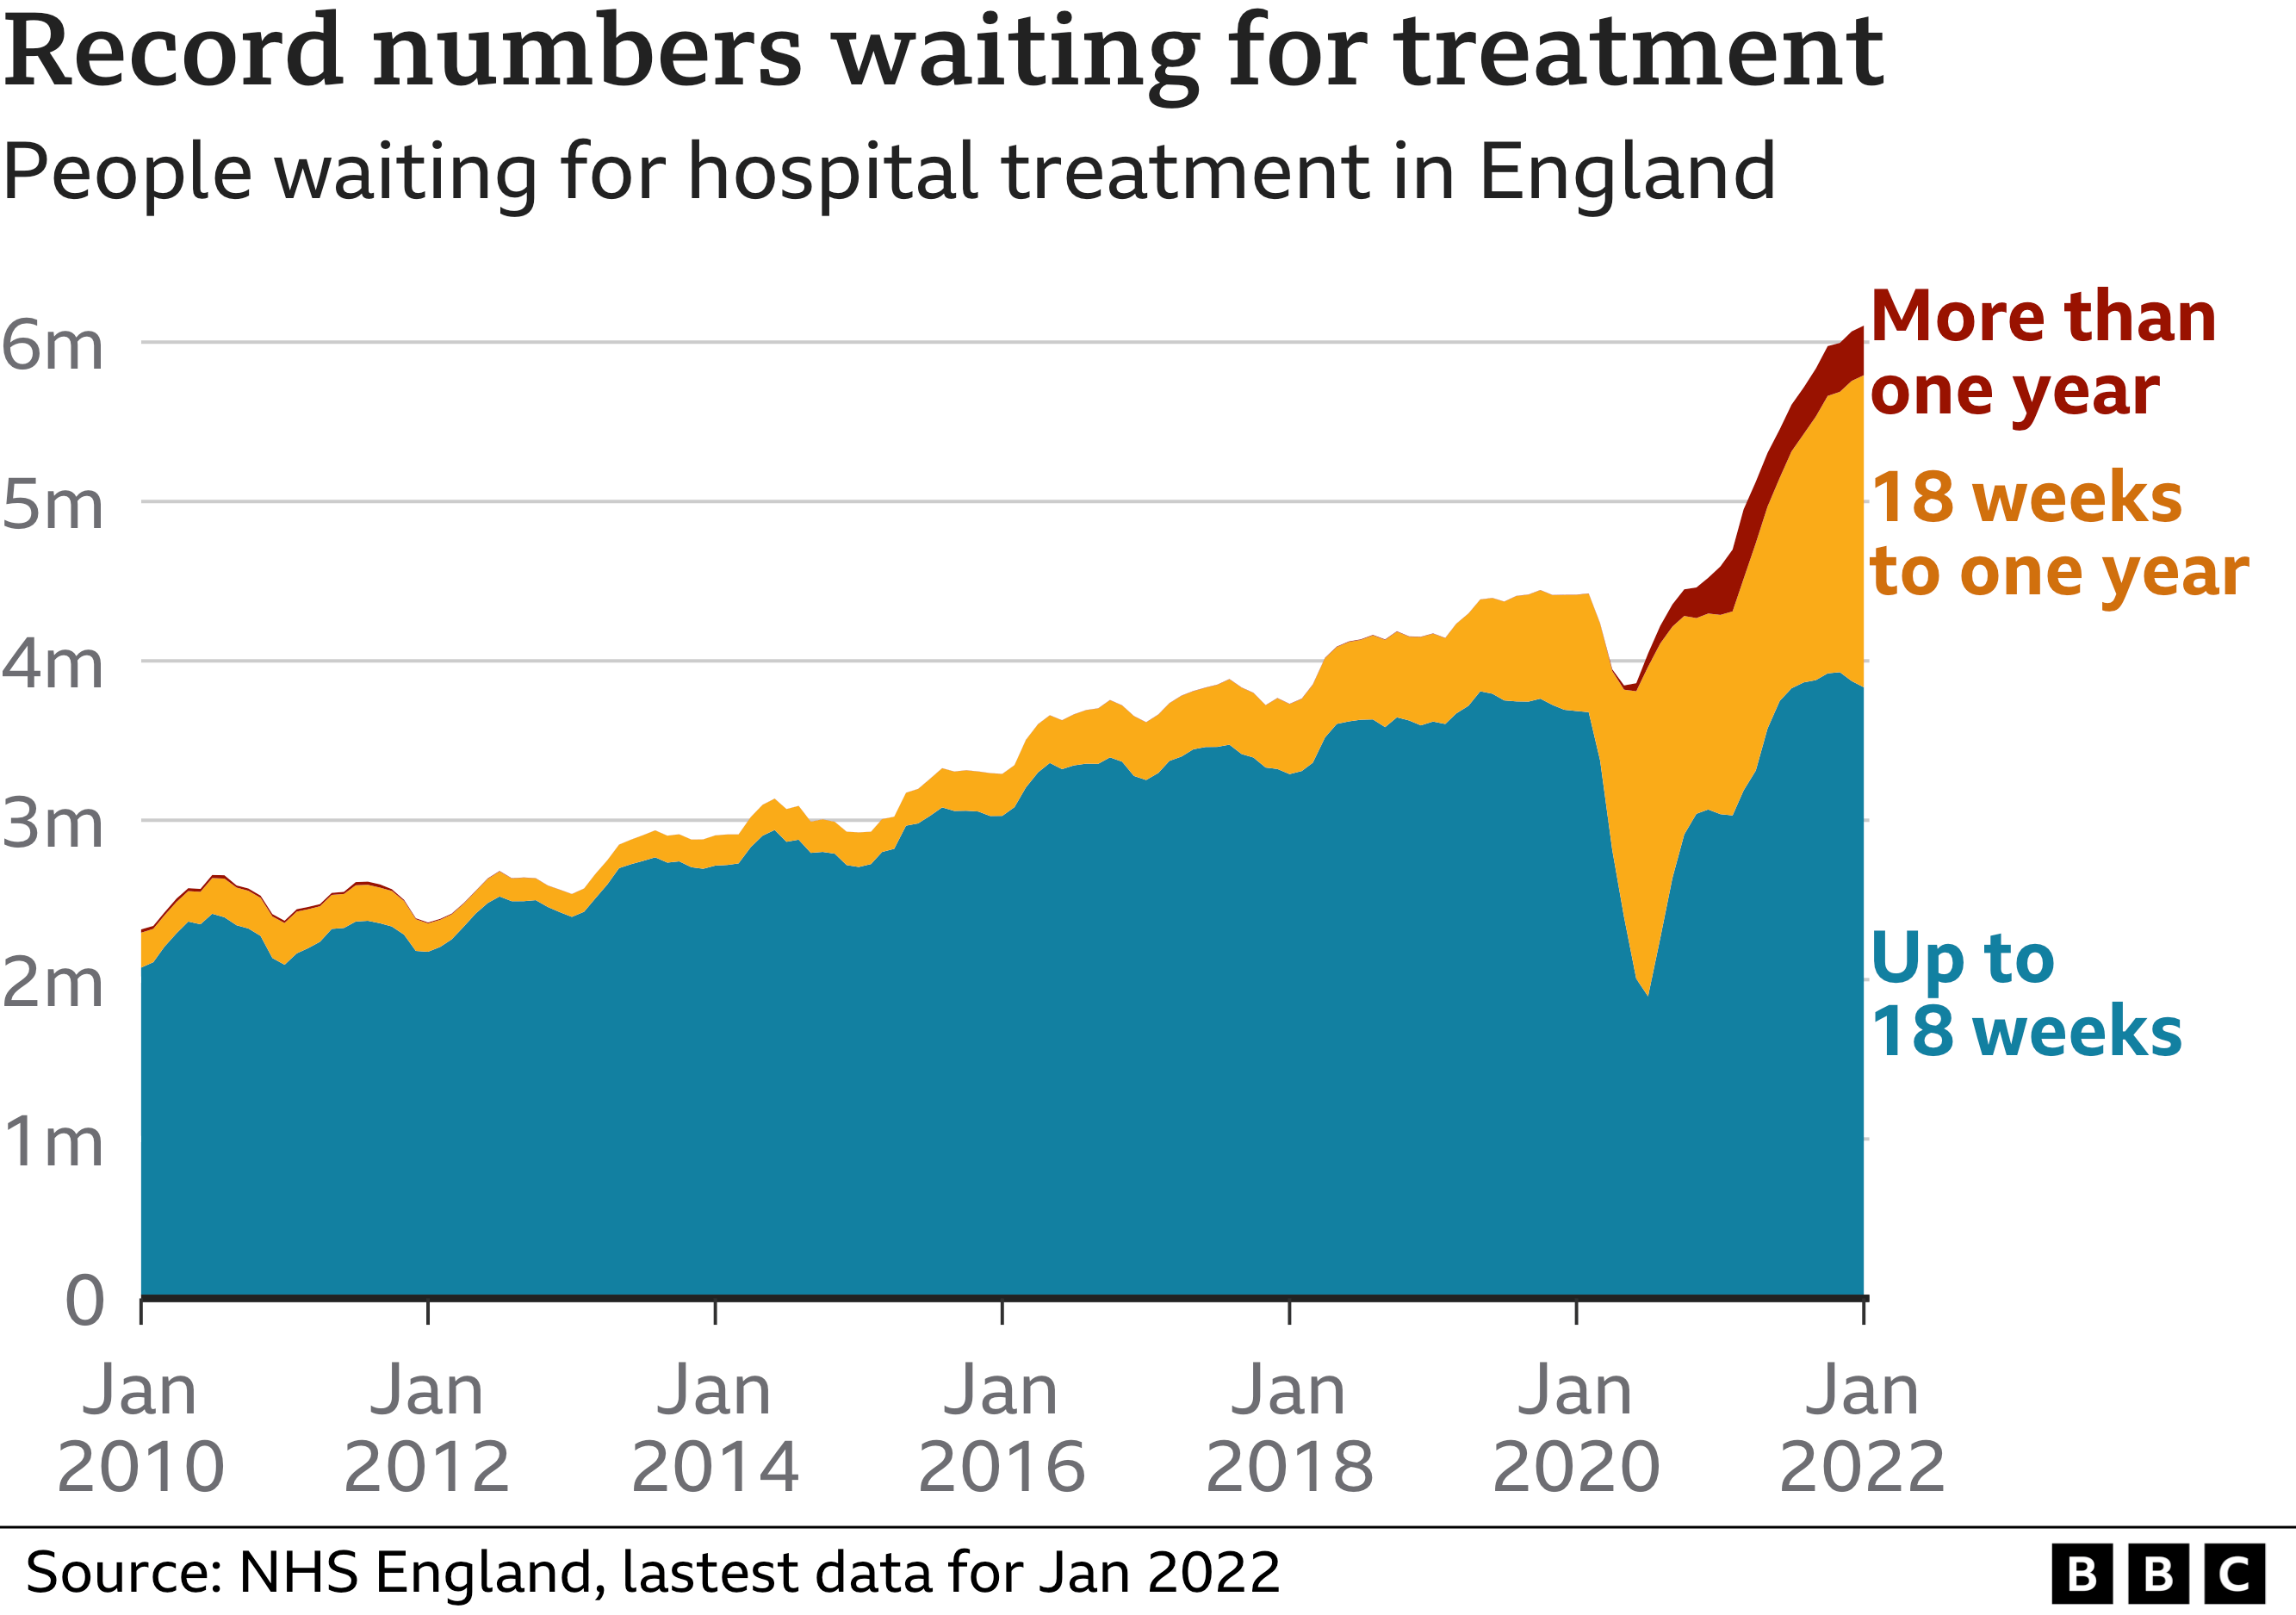 Chart showing numbers waiting for hospital treatment